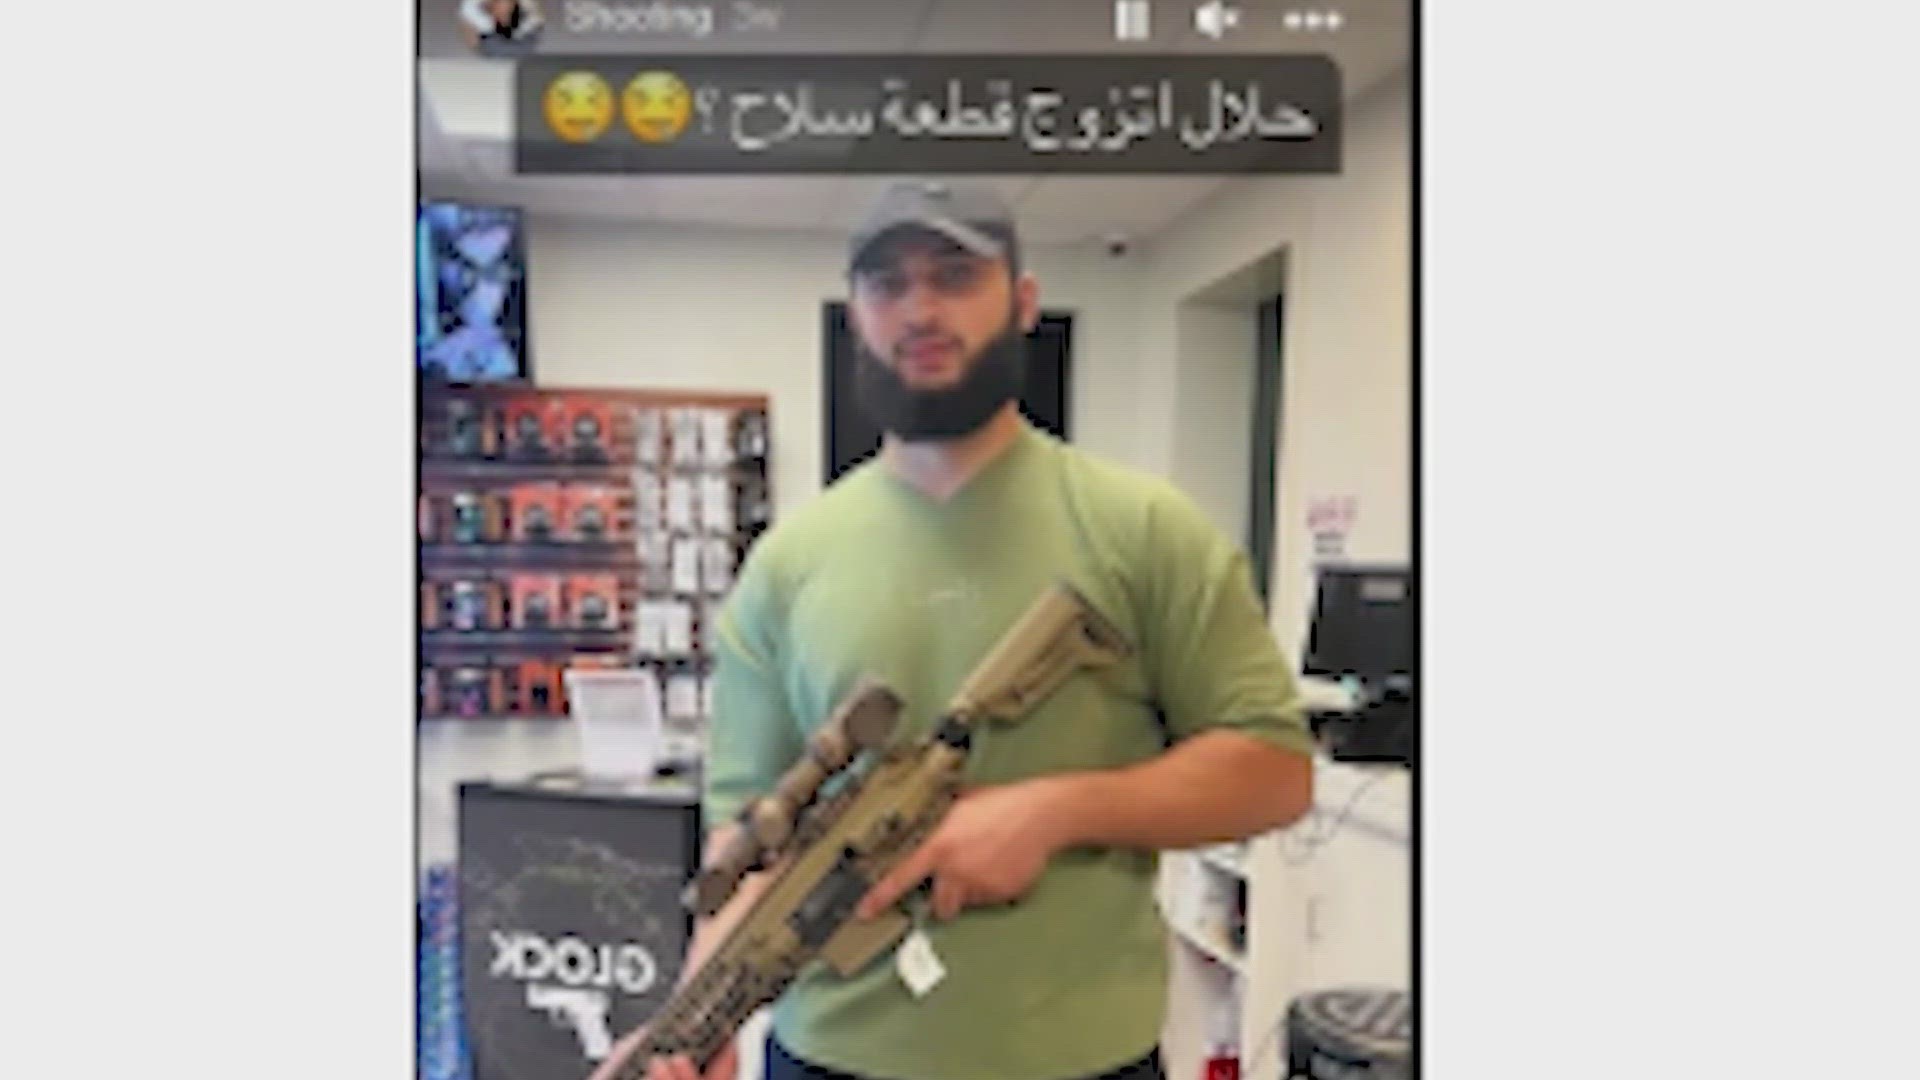 FBI agents in Houston arrested Sohaib Abuayyash, 20, earlier this month and charged him with possession of a firearm by a prohibited person.